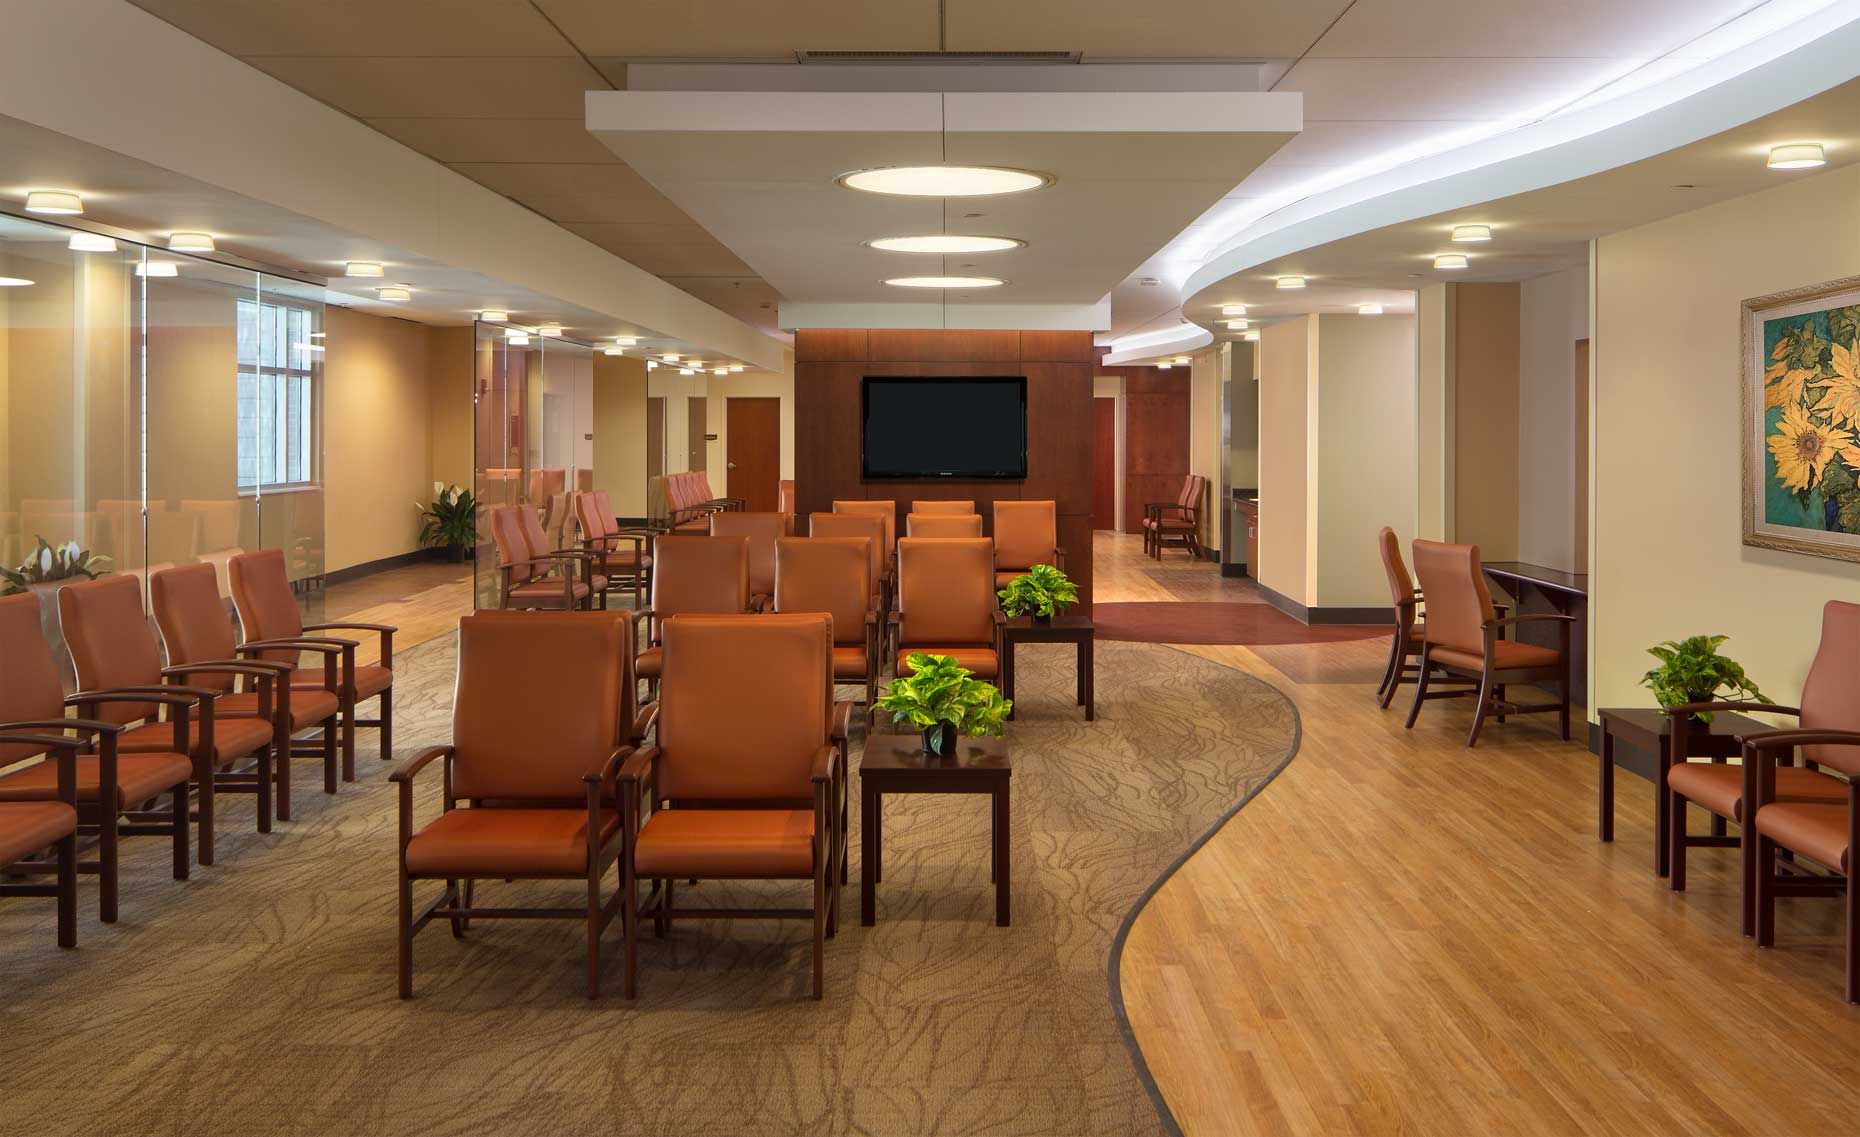 An informative photo of a waiting room at the Saint Francis Hospital Clinic Services Building